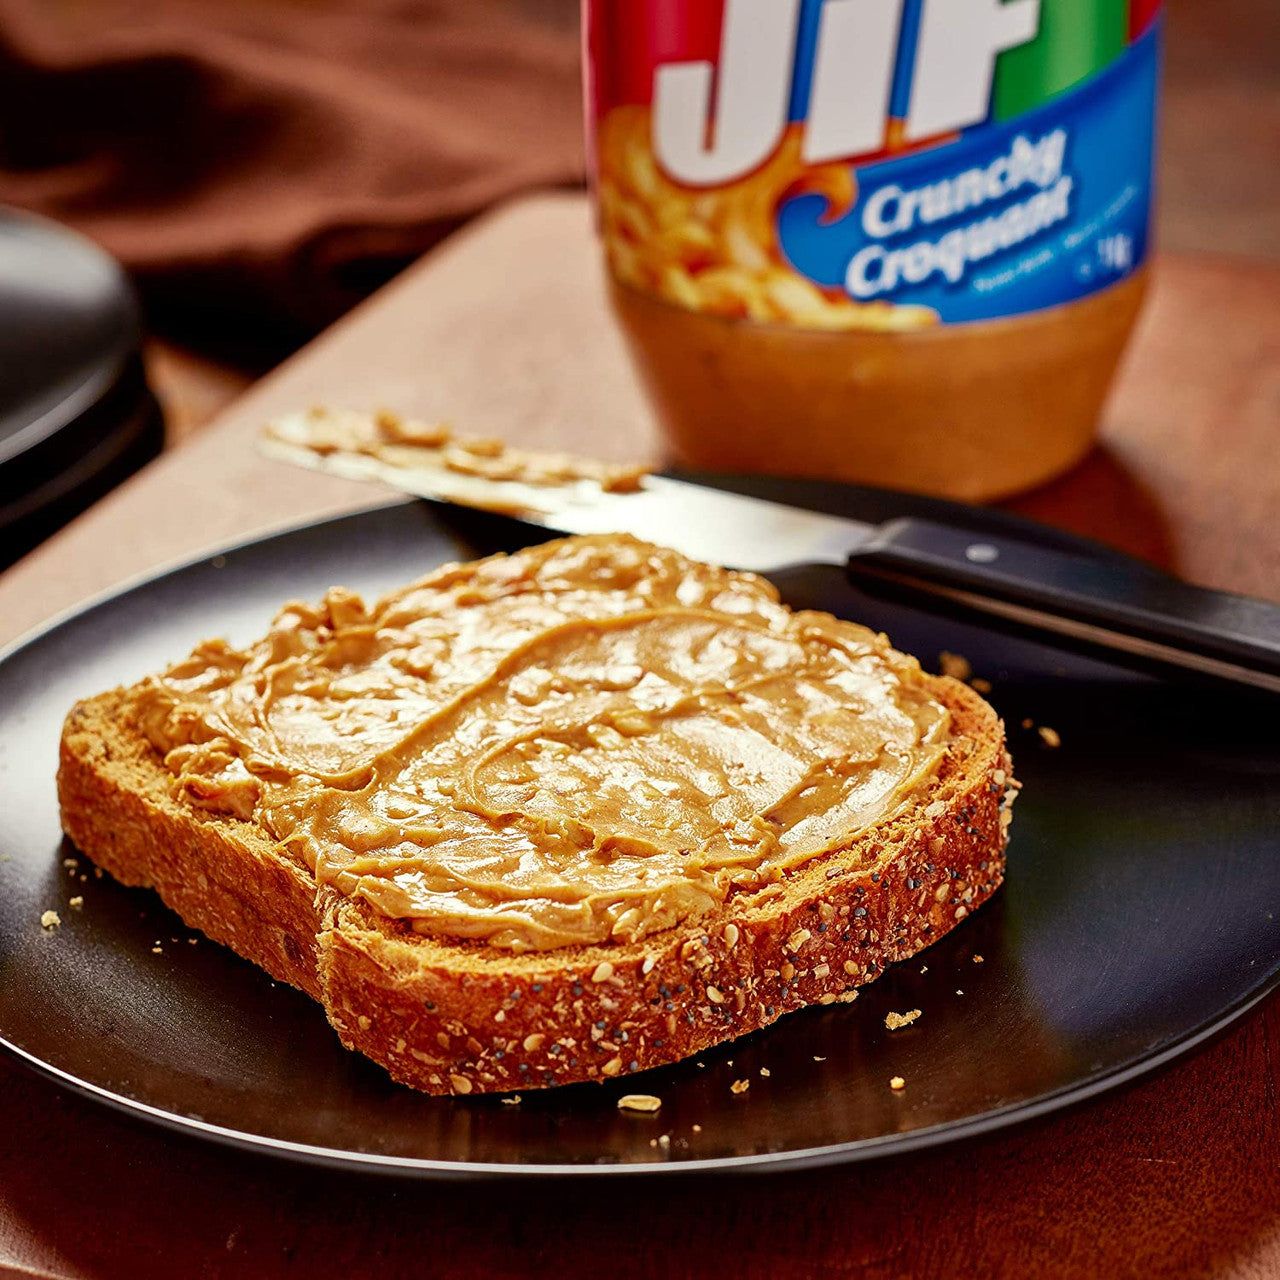 Jif Crunchy Peanut Butter, 1kg/2.2lbs., {Imported from Canada}